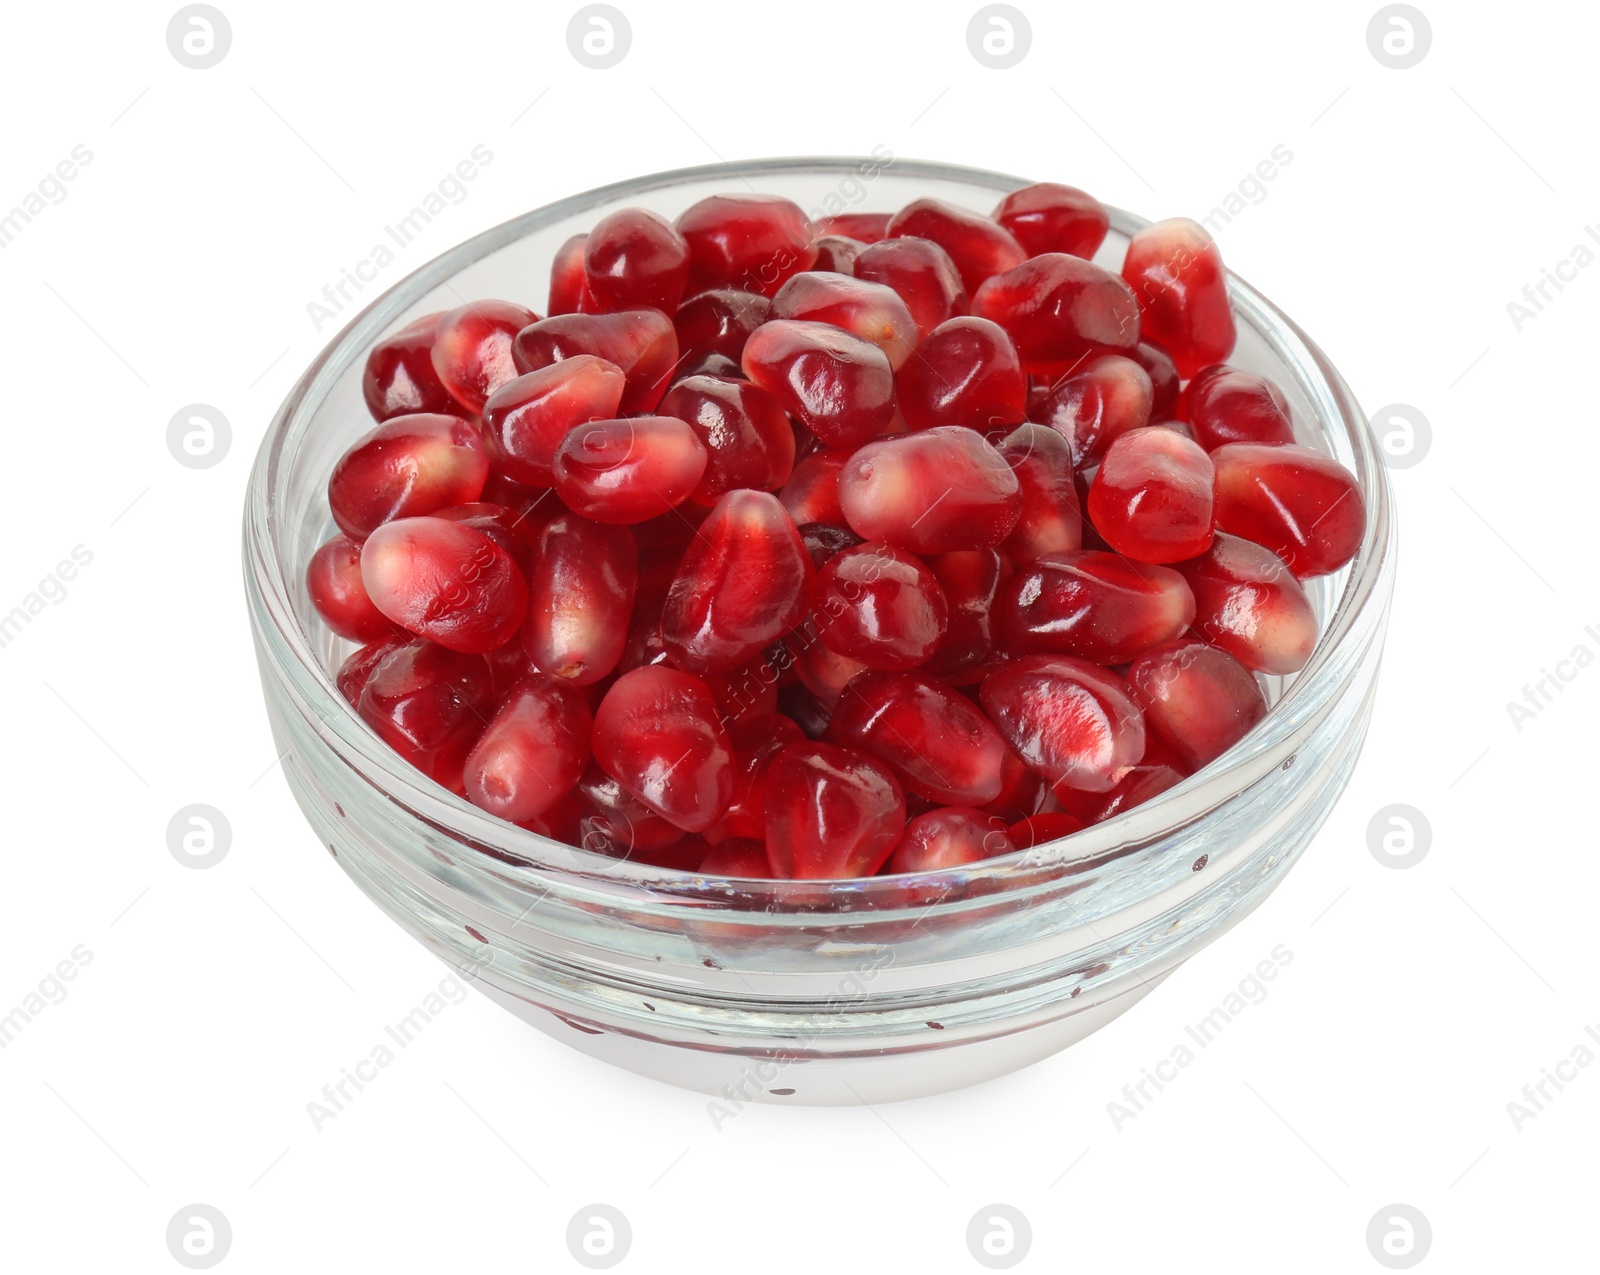 Photo of Ripe juicy pomegranate grains in bowl isolated on white